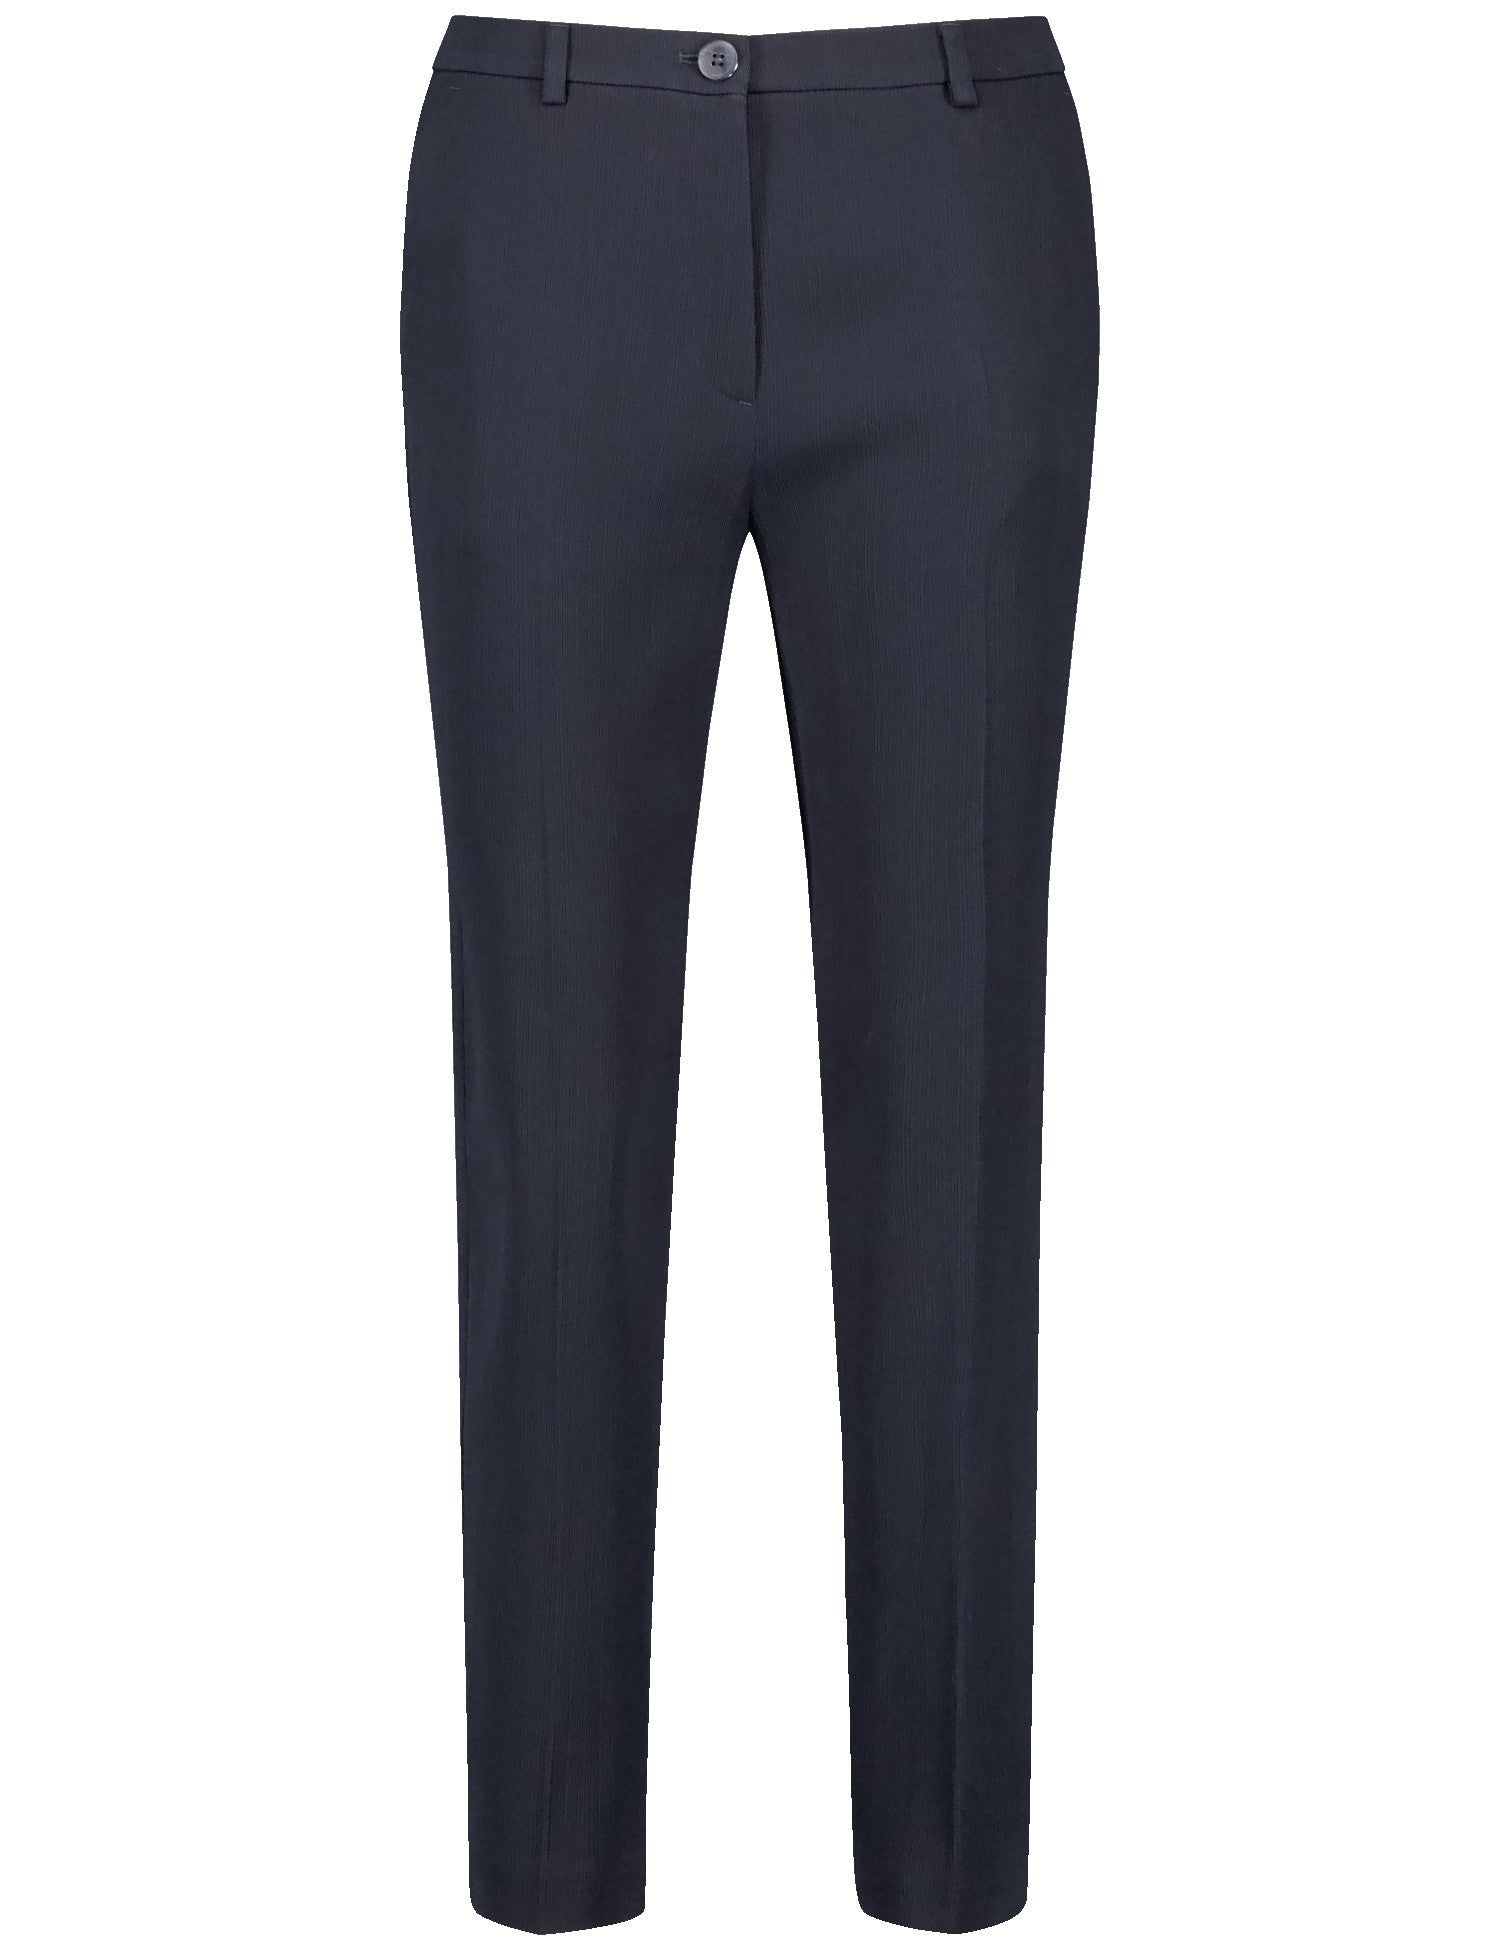 Gerry Weber 7/8 Trousers Navy